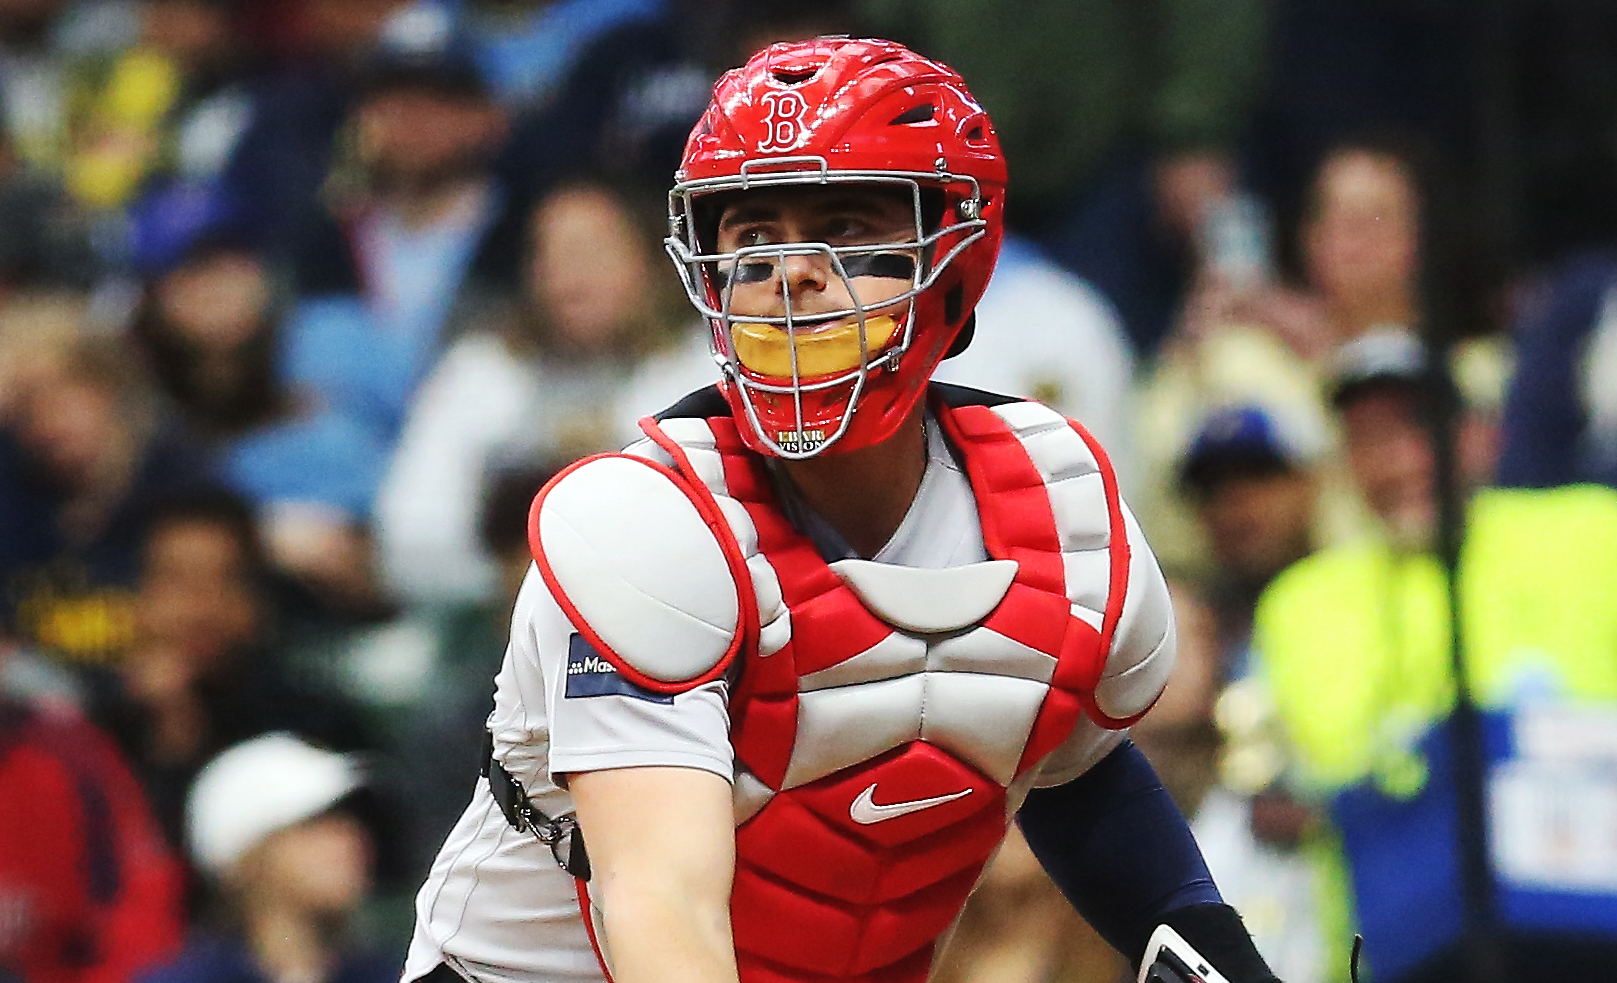 Christian Vázquez injury: Boston Red Sox catcher not seriously hurt after  getting hit in face in 'freak accident' during practice 